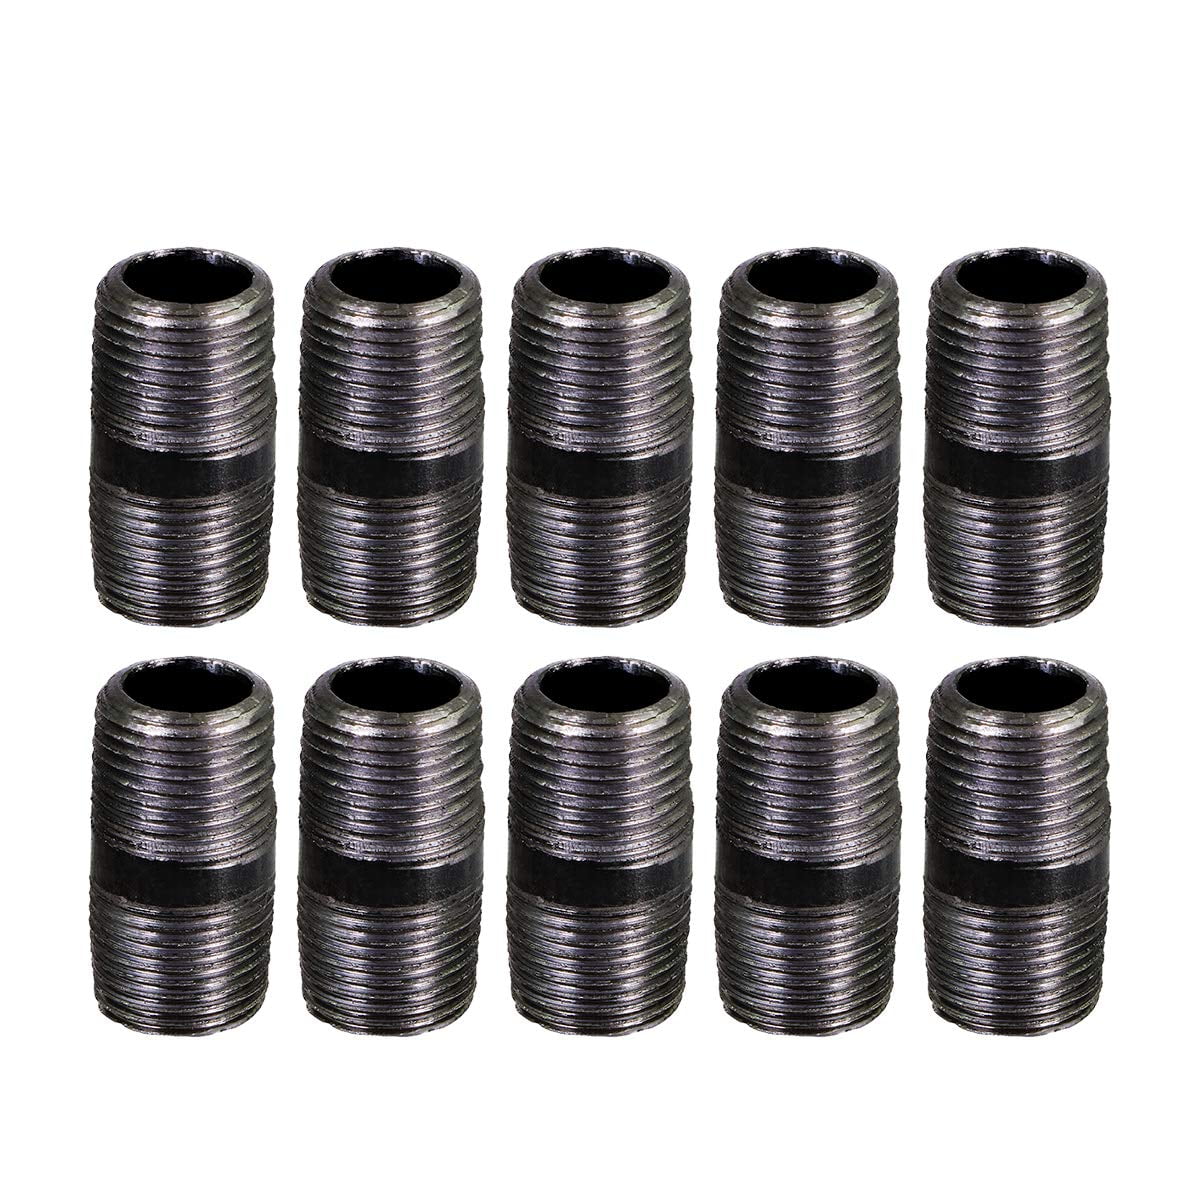 5 X 3/4'' Black Threaded Pipe Industrial Steam Punk And Furniture Design 